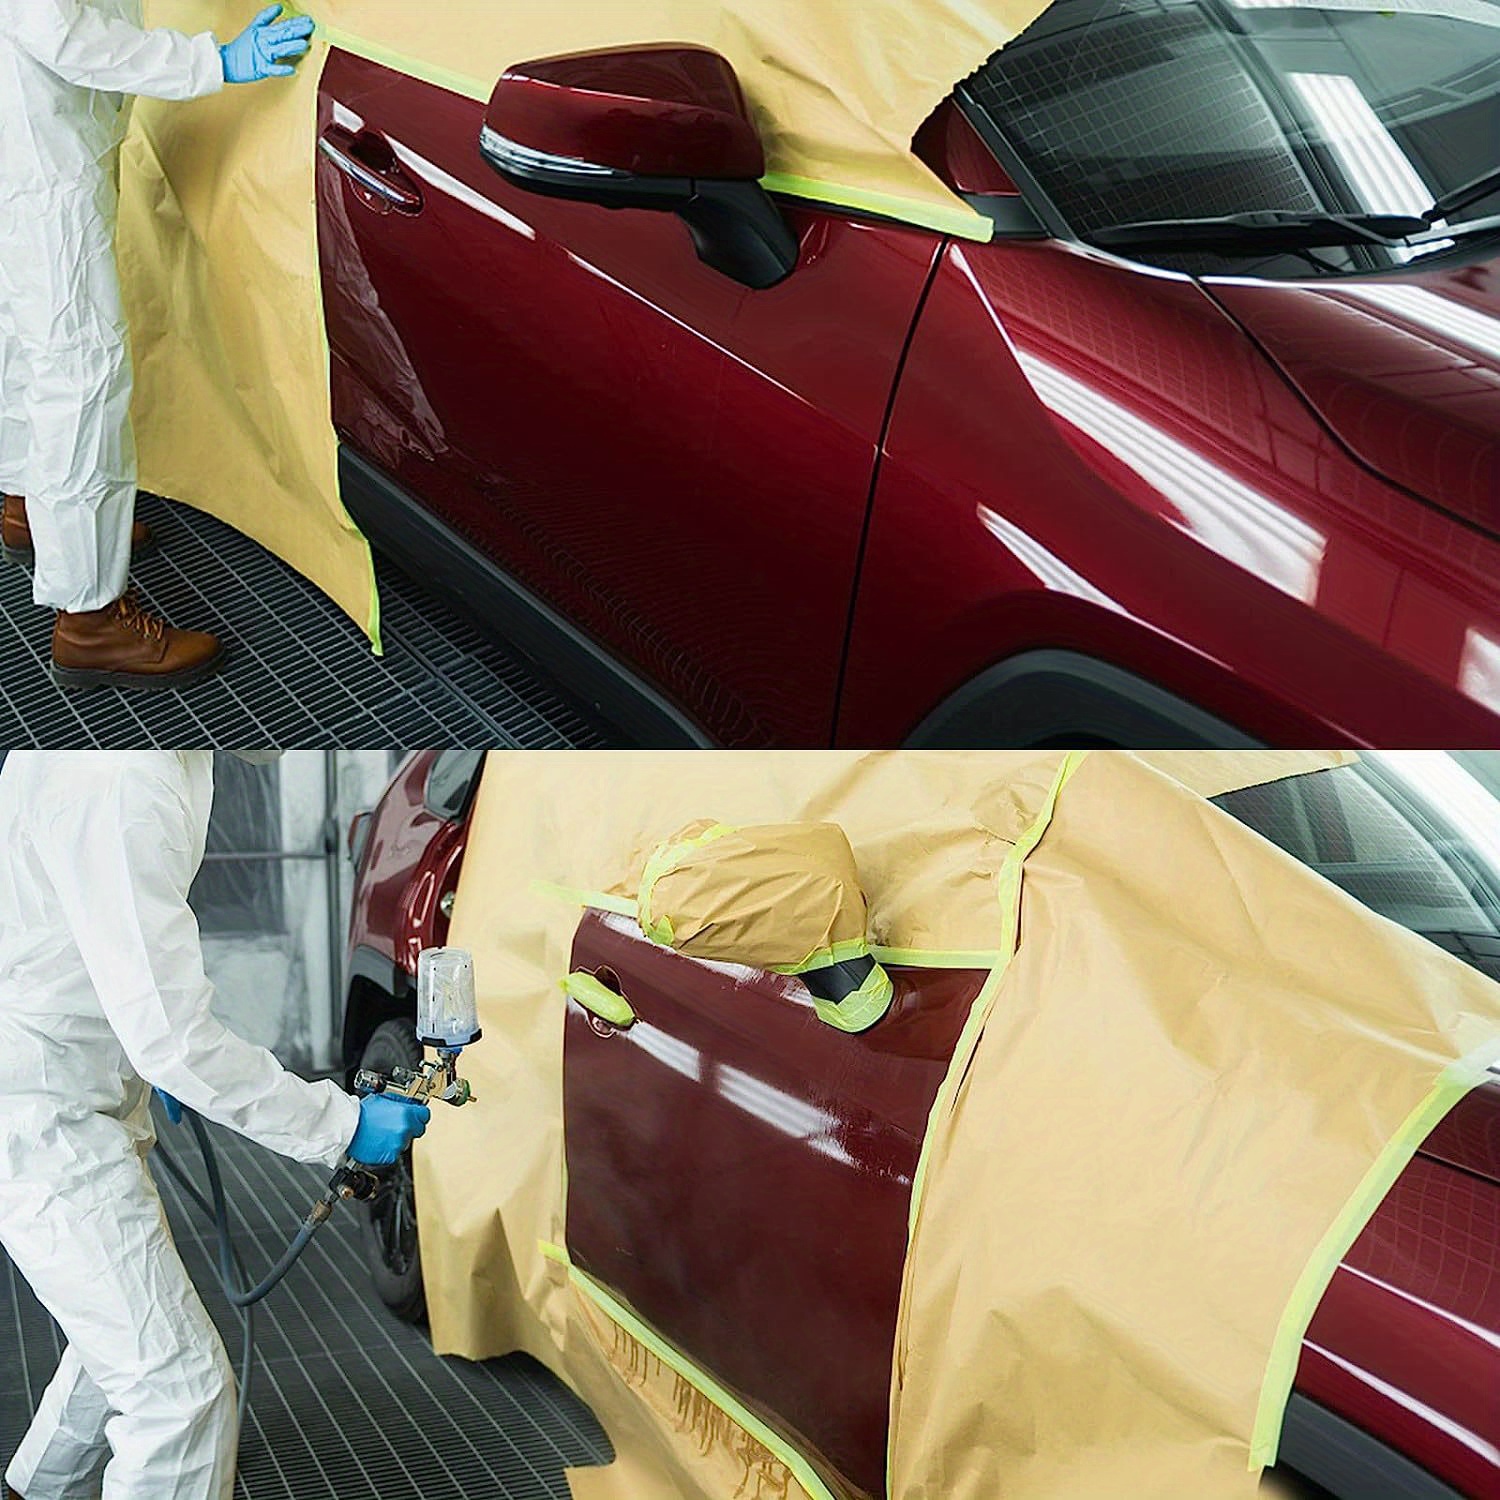 Masking Paper for Automotive Painting